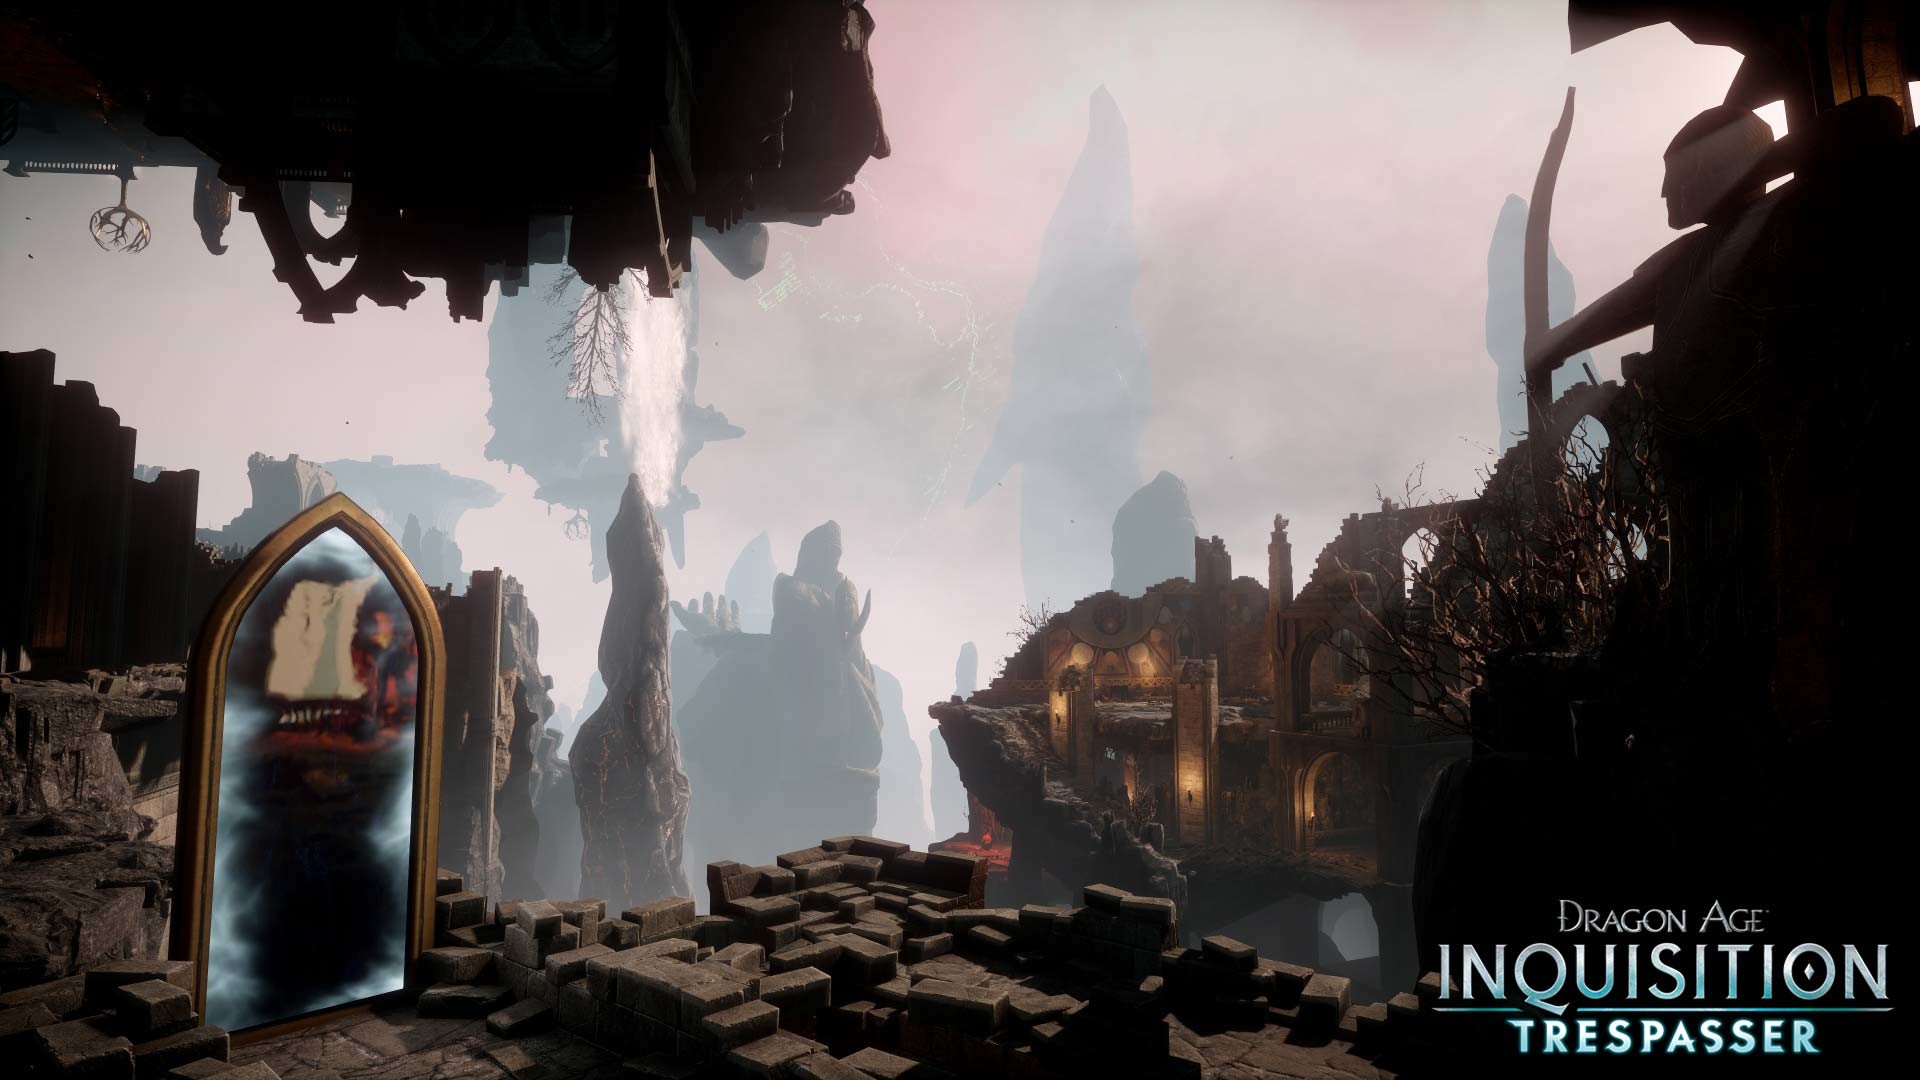 1920x1080 Dragon Age: Inquisition -- Trespasser Screenshots, Pictures, Wallpapers -  PC - IGN